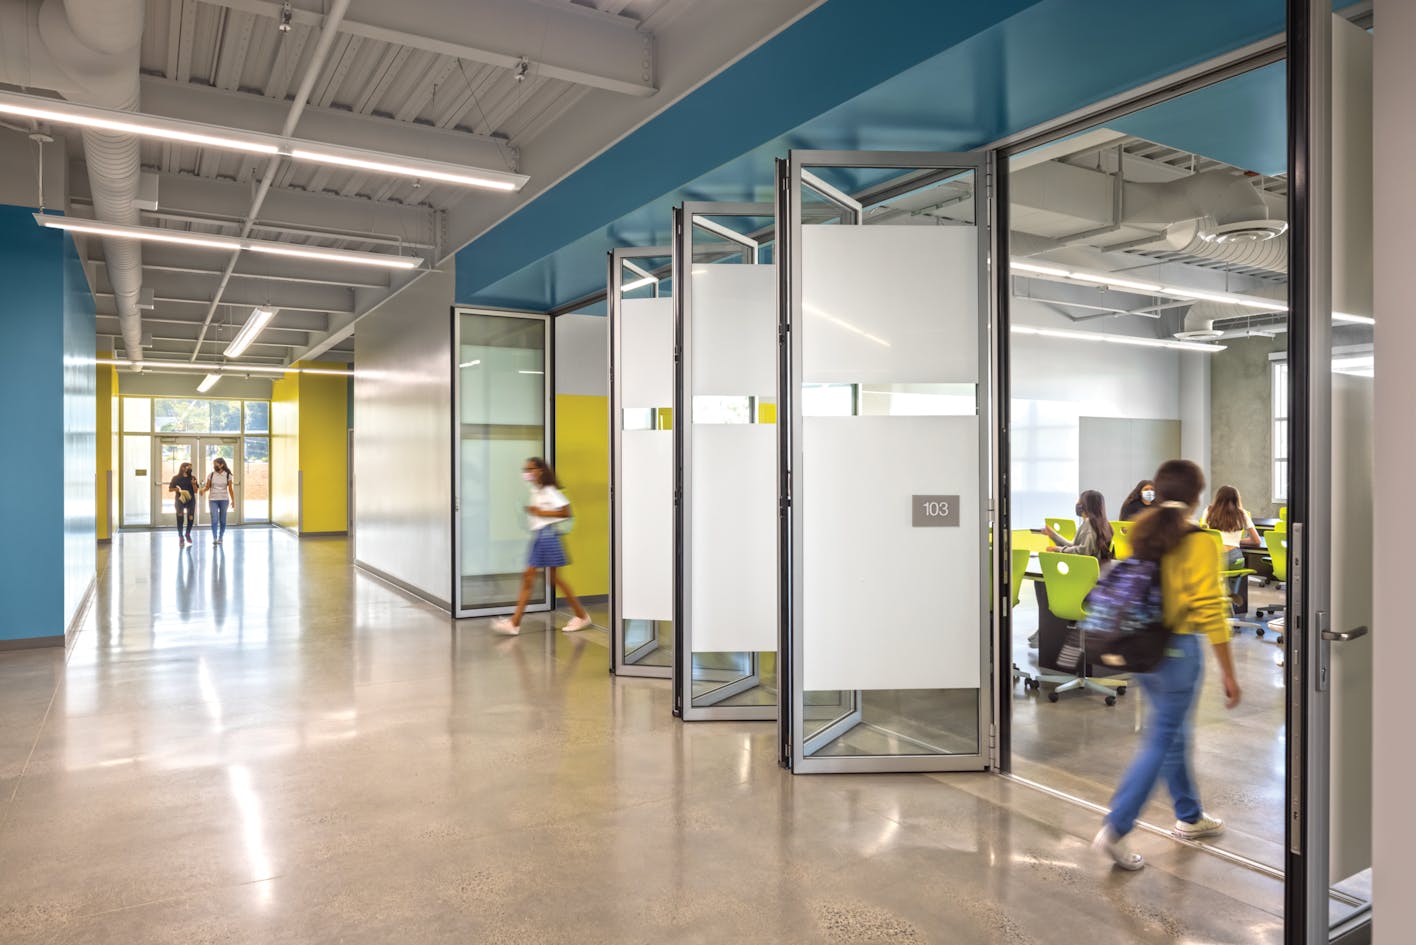 21st century learning with Generation 4 folding glass walls